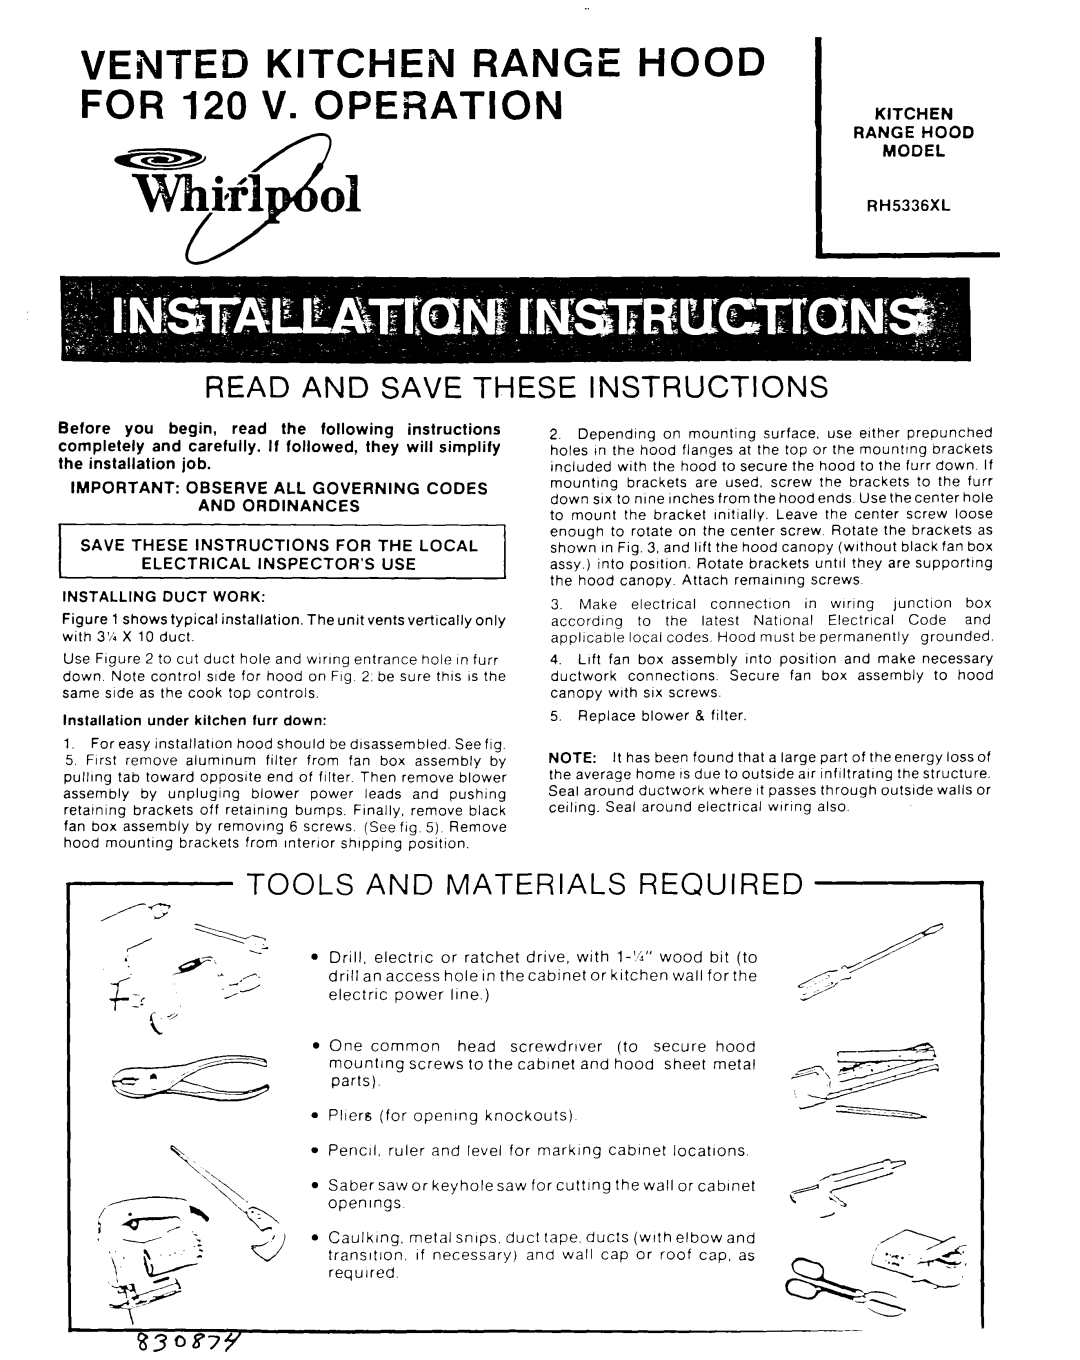 Whirlpool RH5336XL manual Tools, Required, VENTED KITCWEhl RANGE HOOD FOR 120 V. OPERATION, Materials 